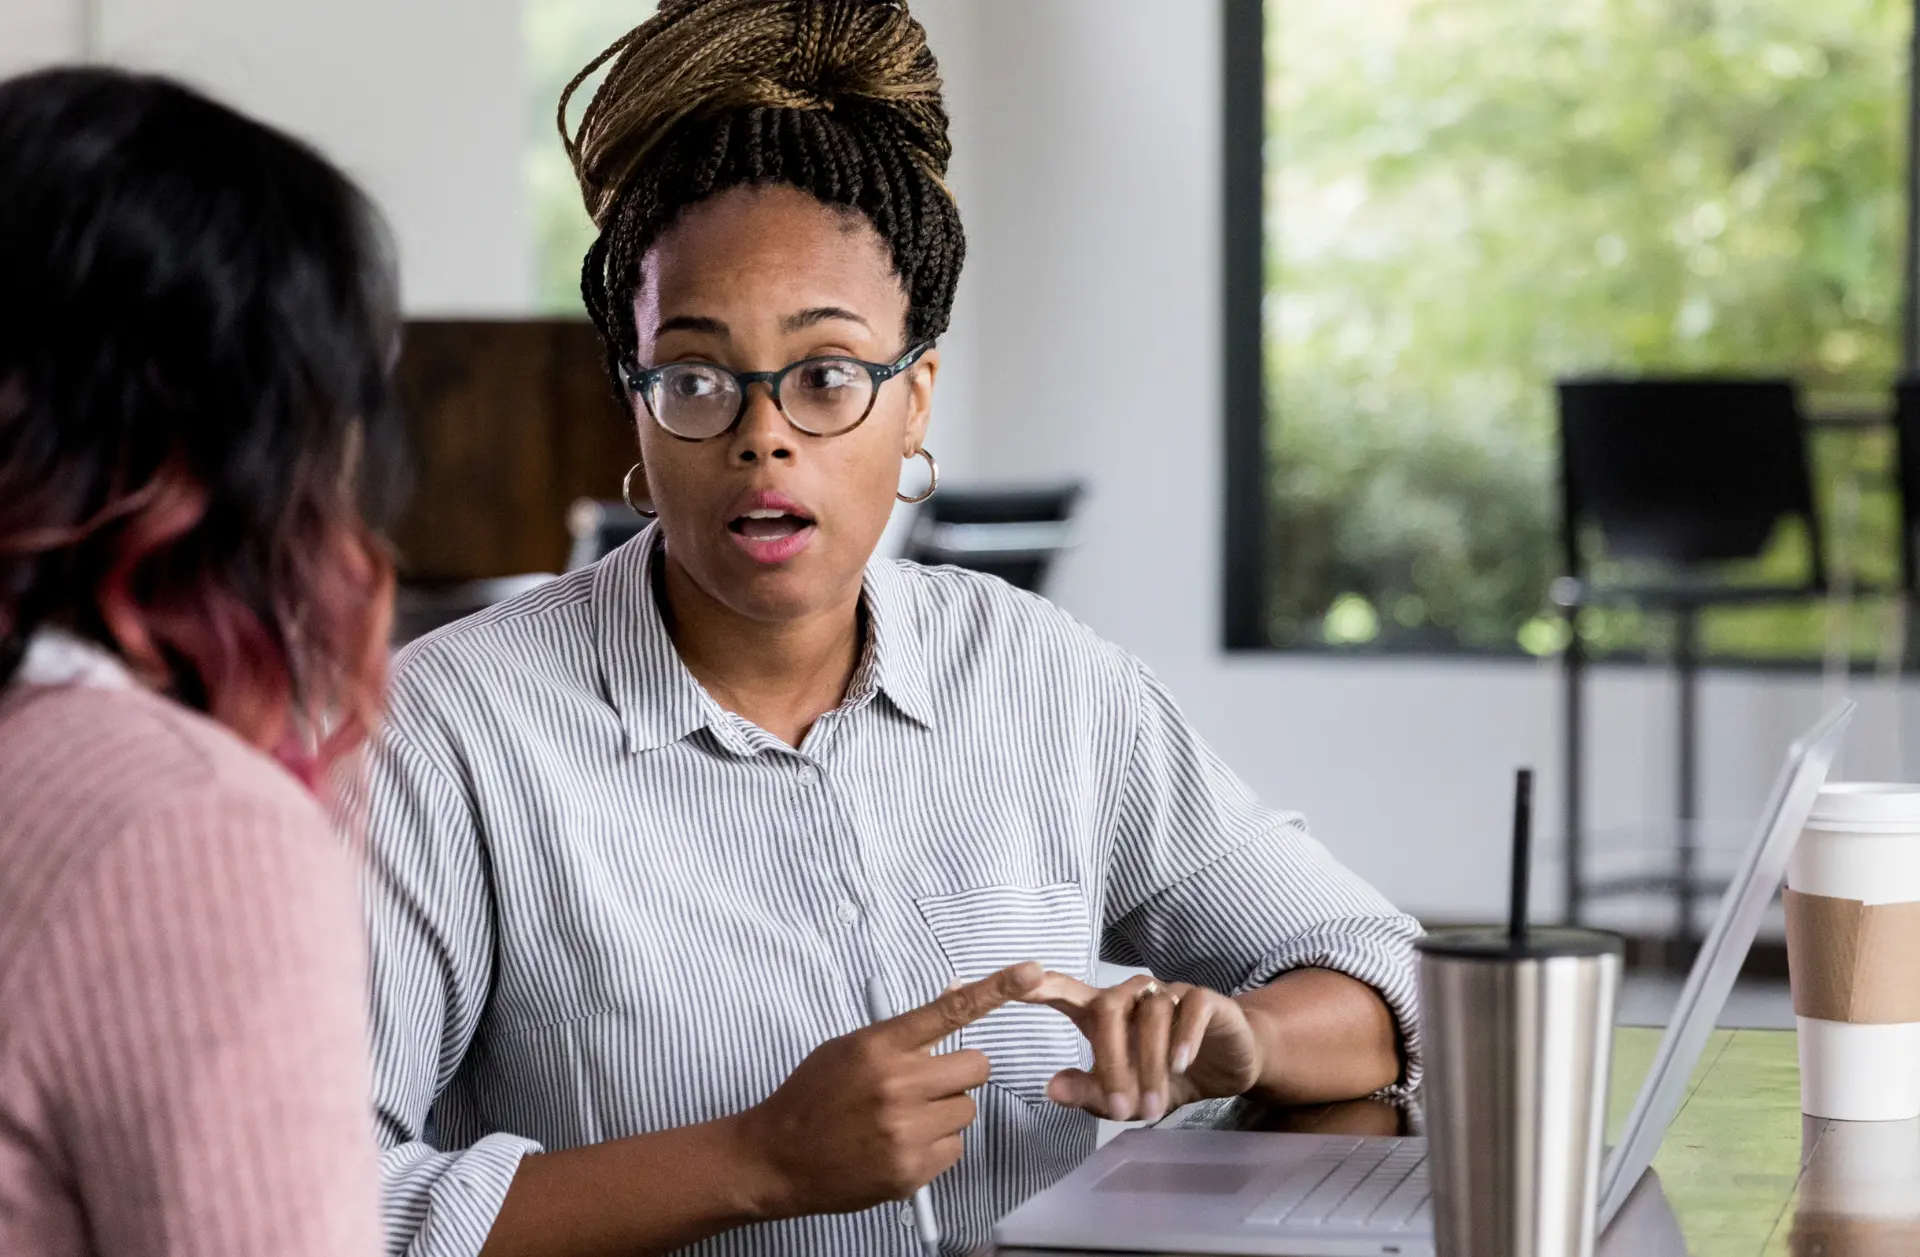 A Black woman wearing glasses talking with another woman in an office.